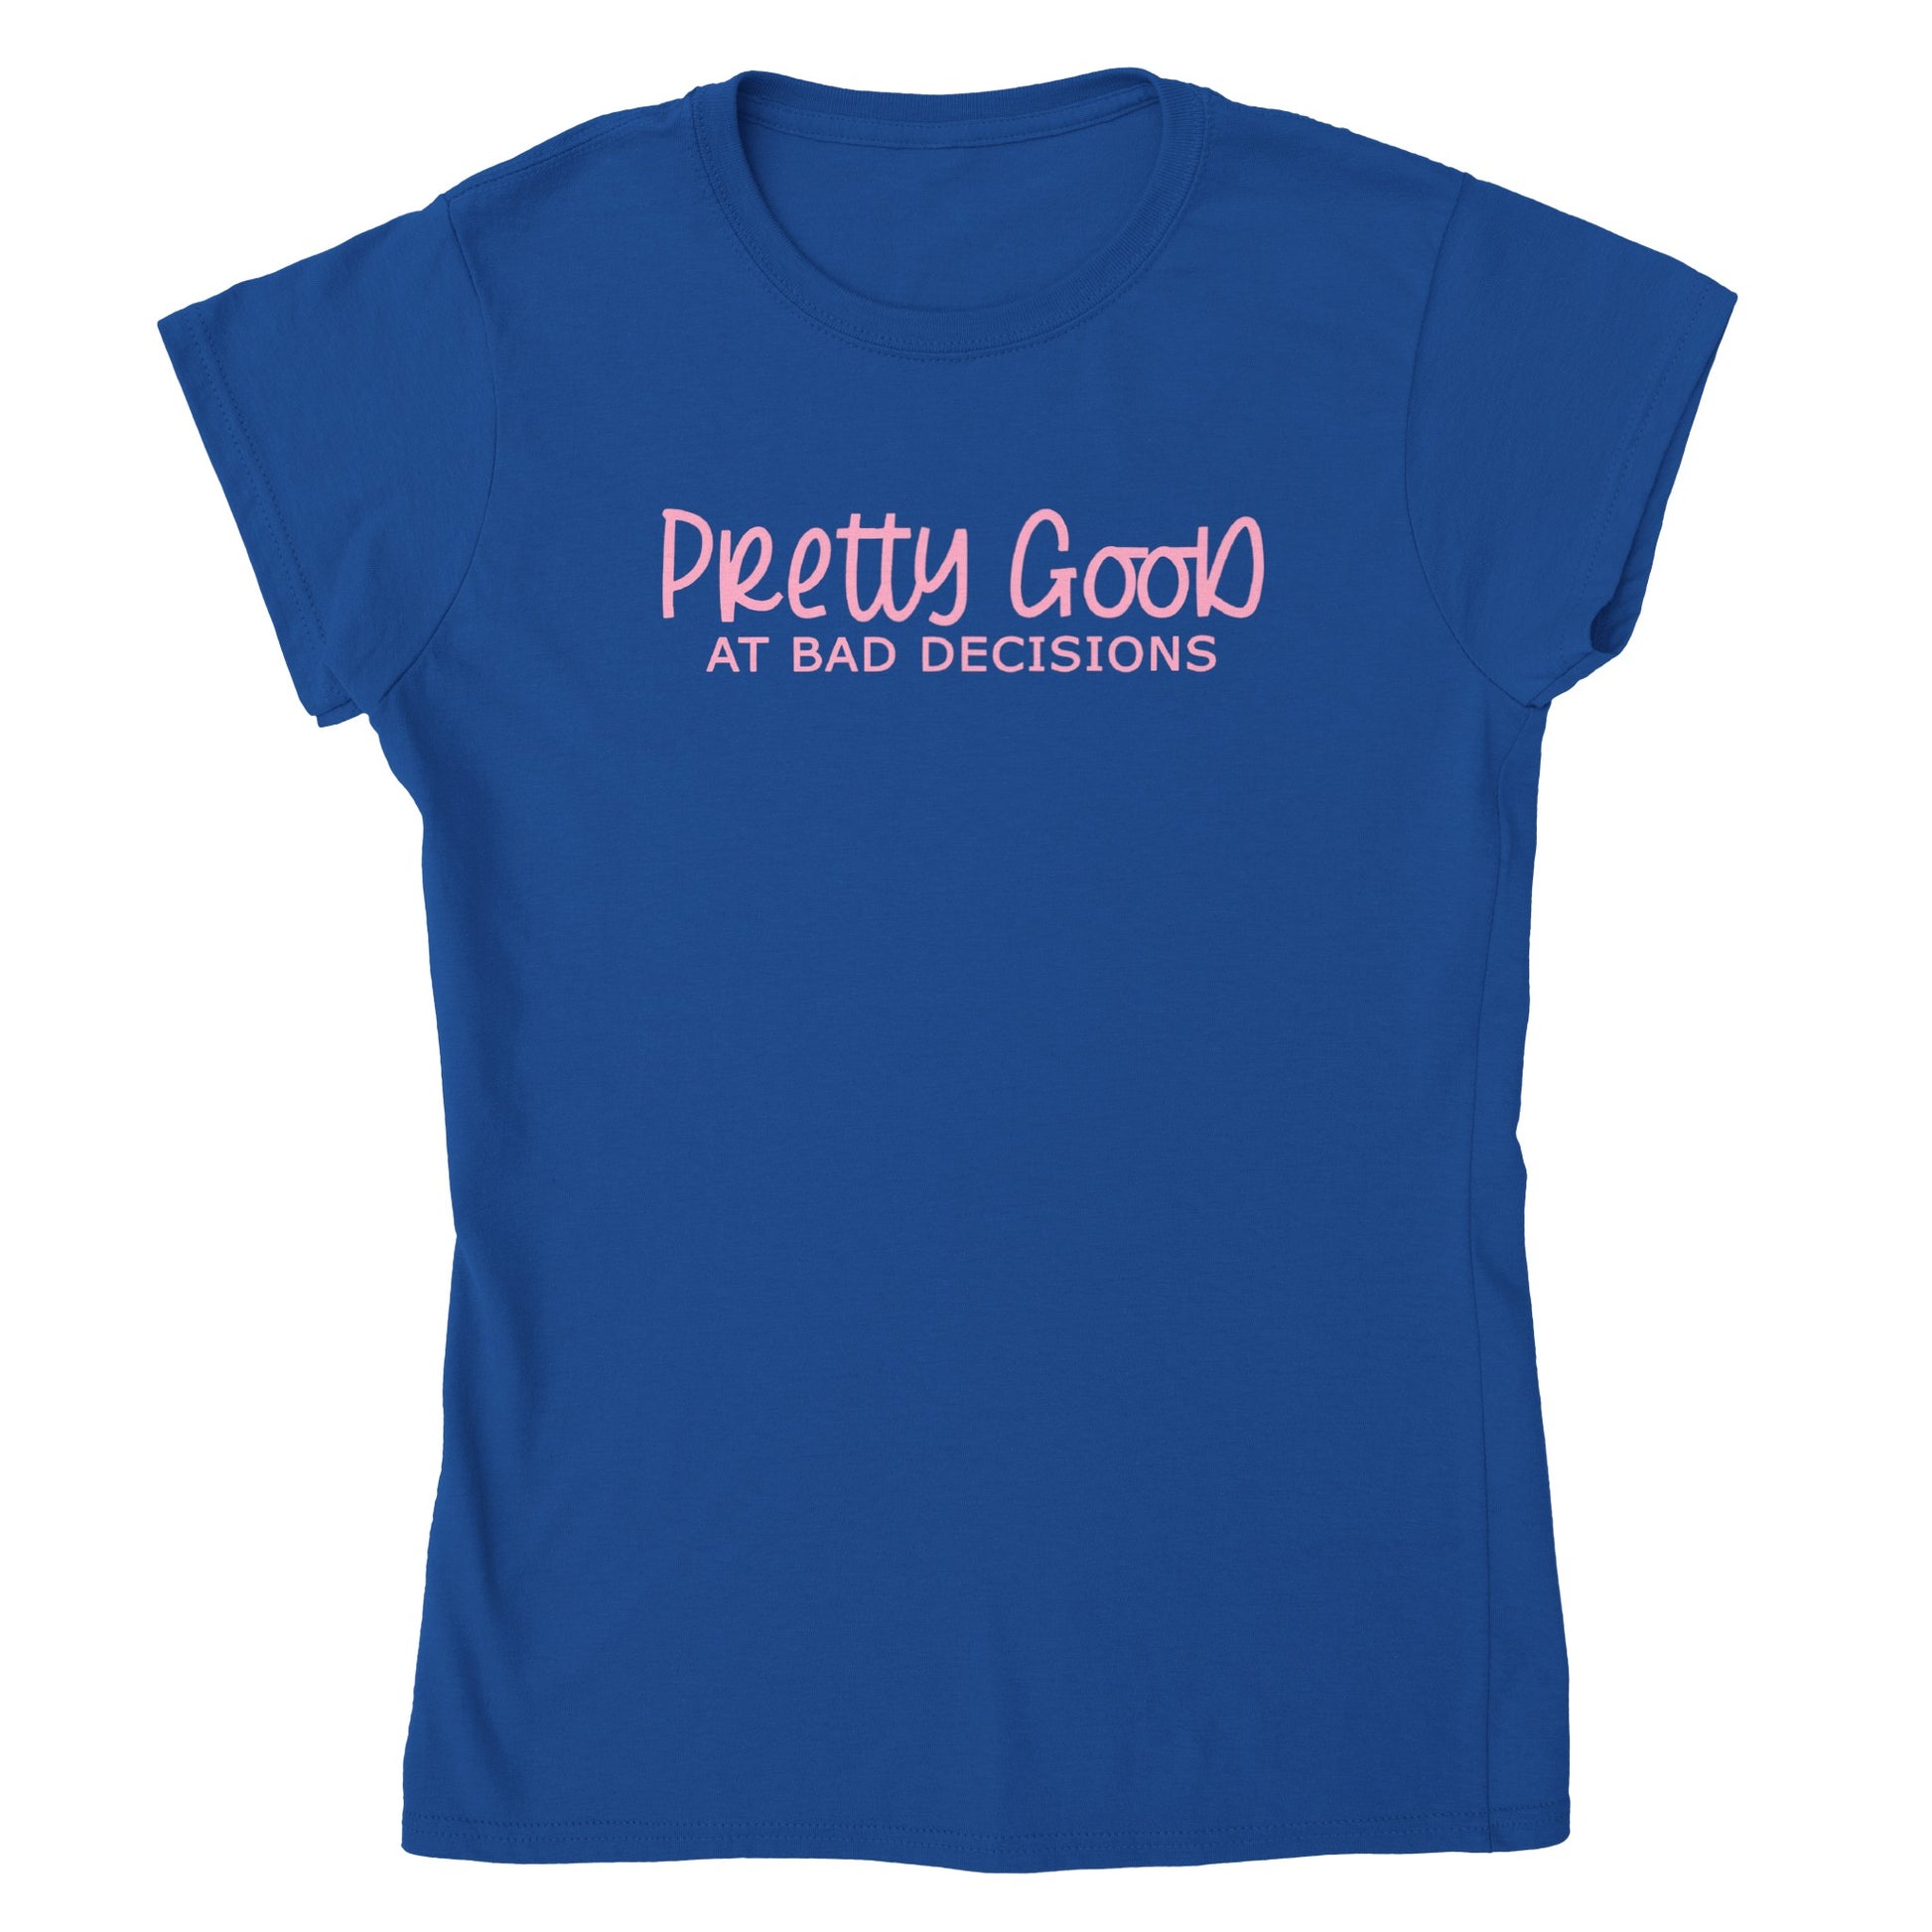 Pretty Good at Bad Decisions - Classic Womens Crewneck T-shirt - Mister Snarky's